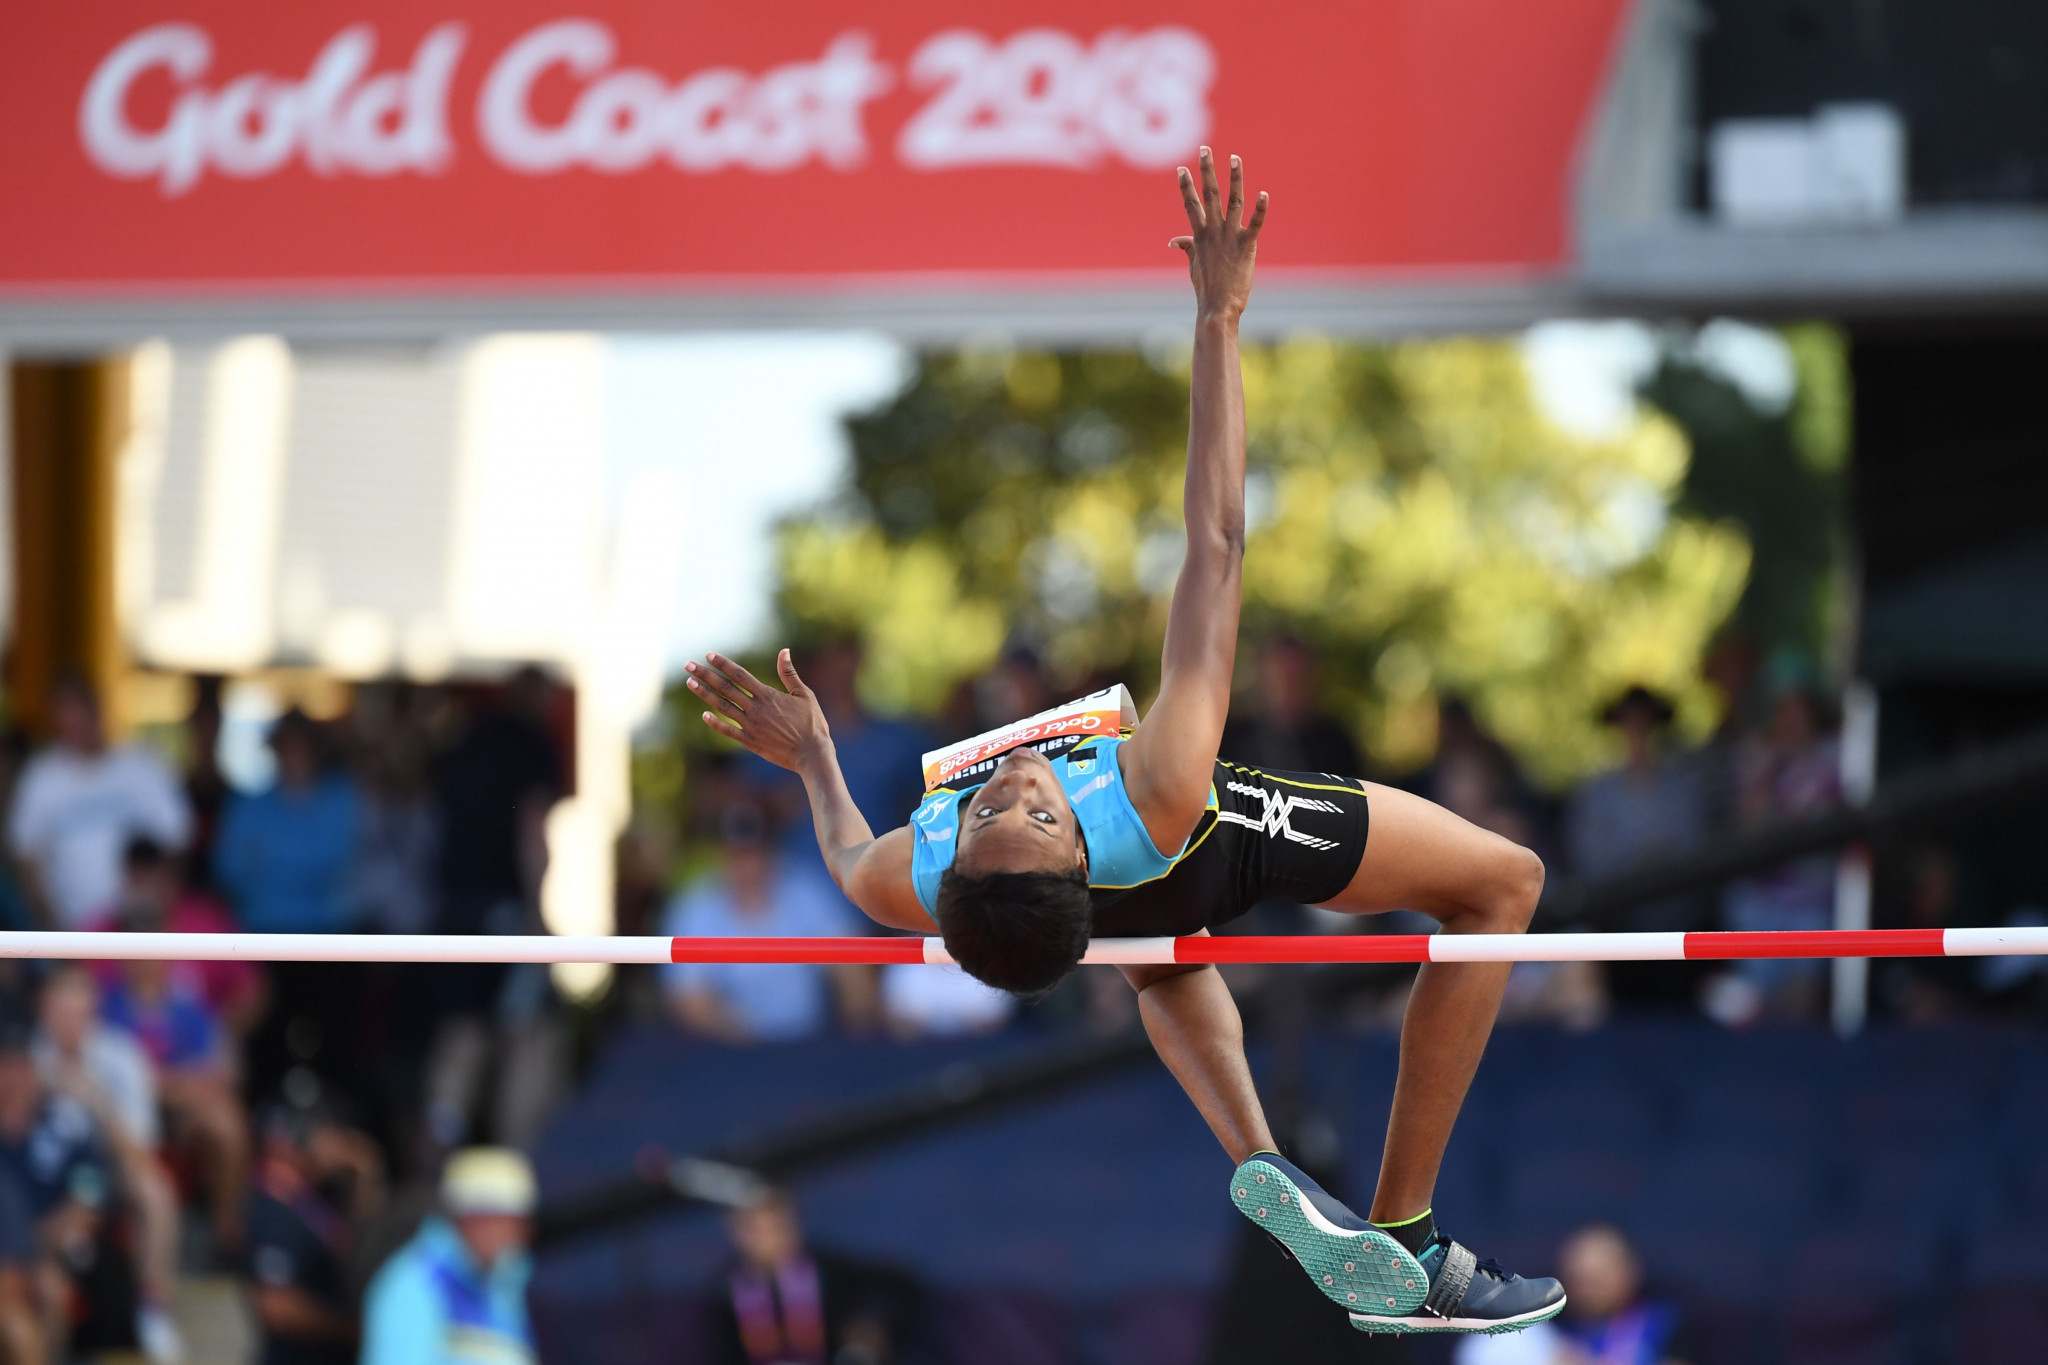 St Lucia 56-year wait for Commonwealth Games gold medal ended with Spencer victory in high jump